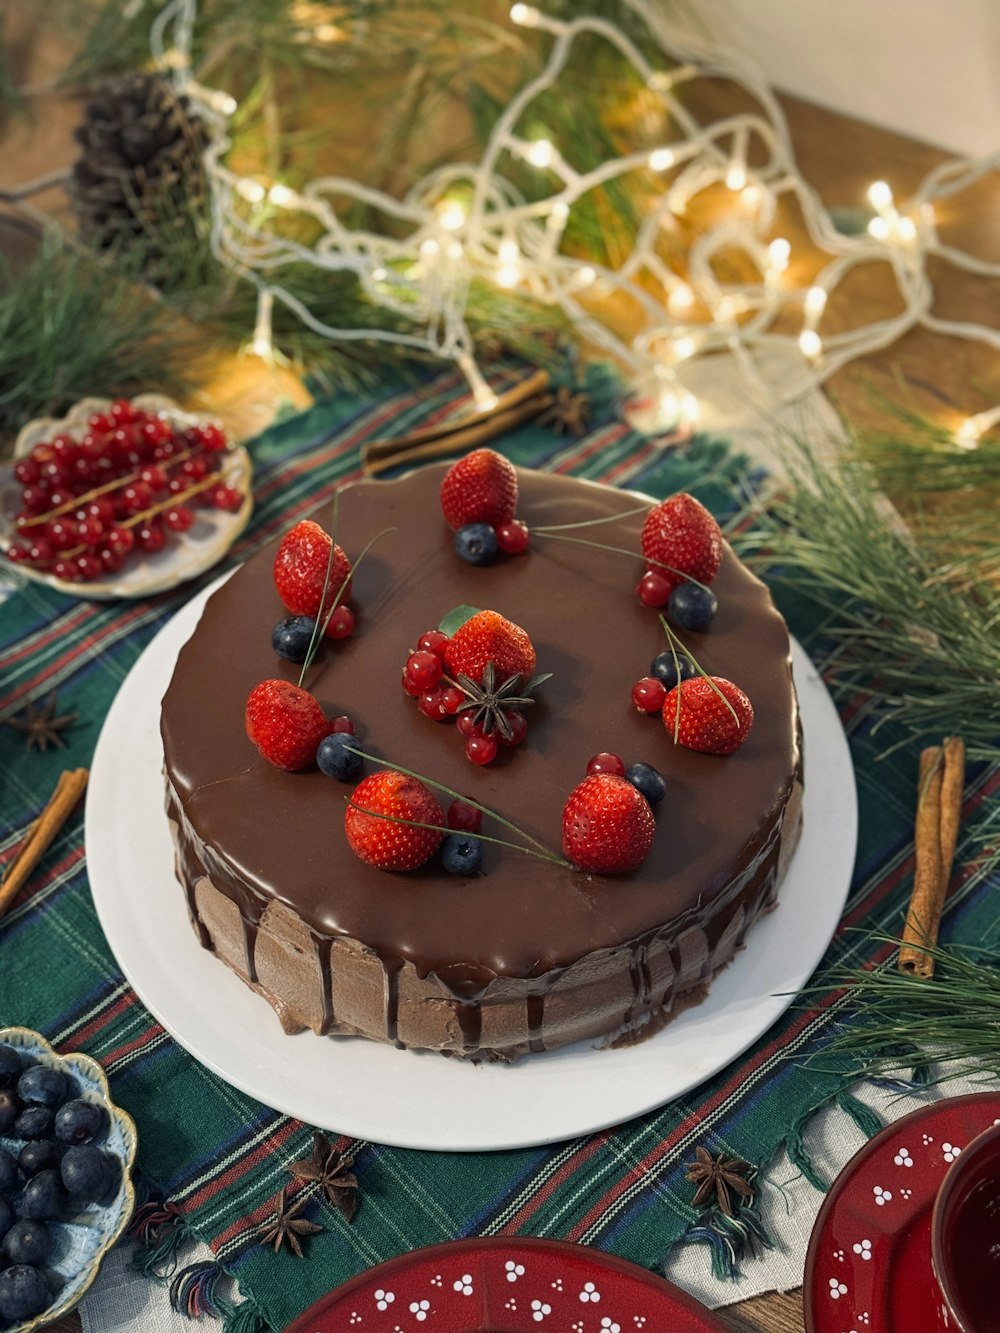 a chocolate cake with berries on top of it